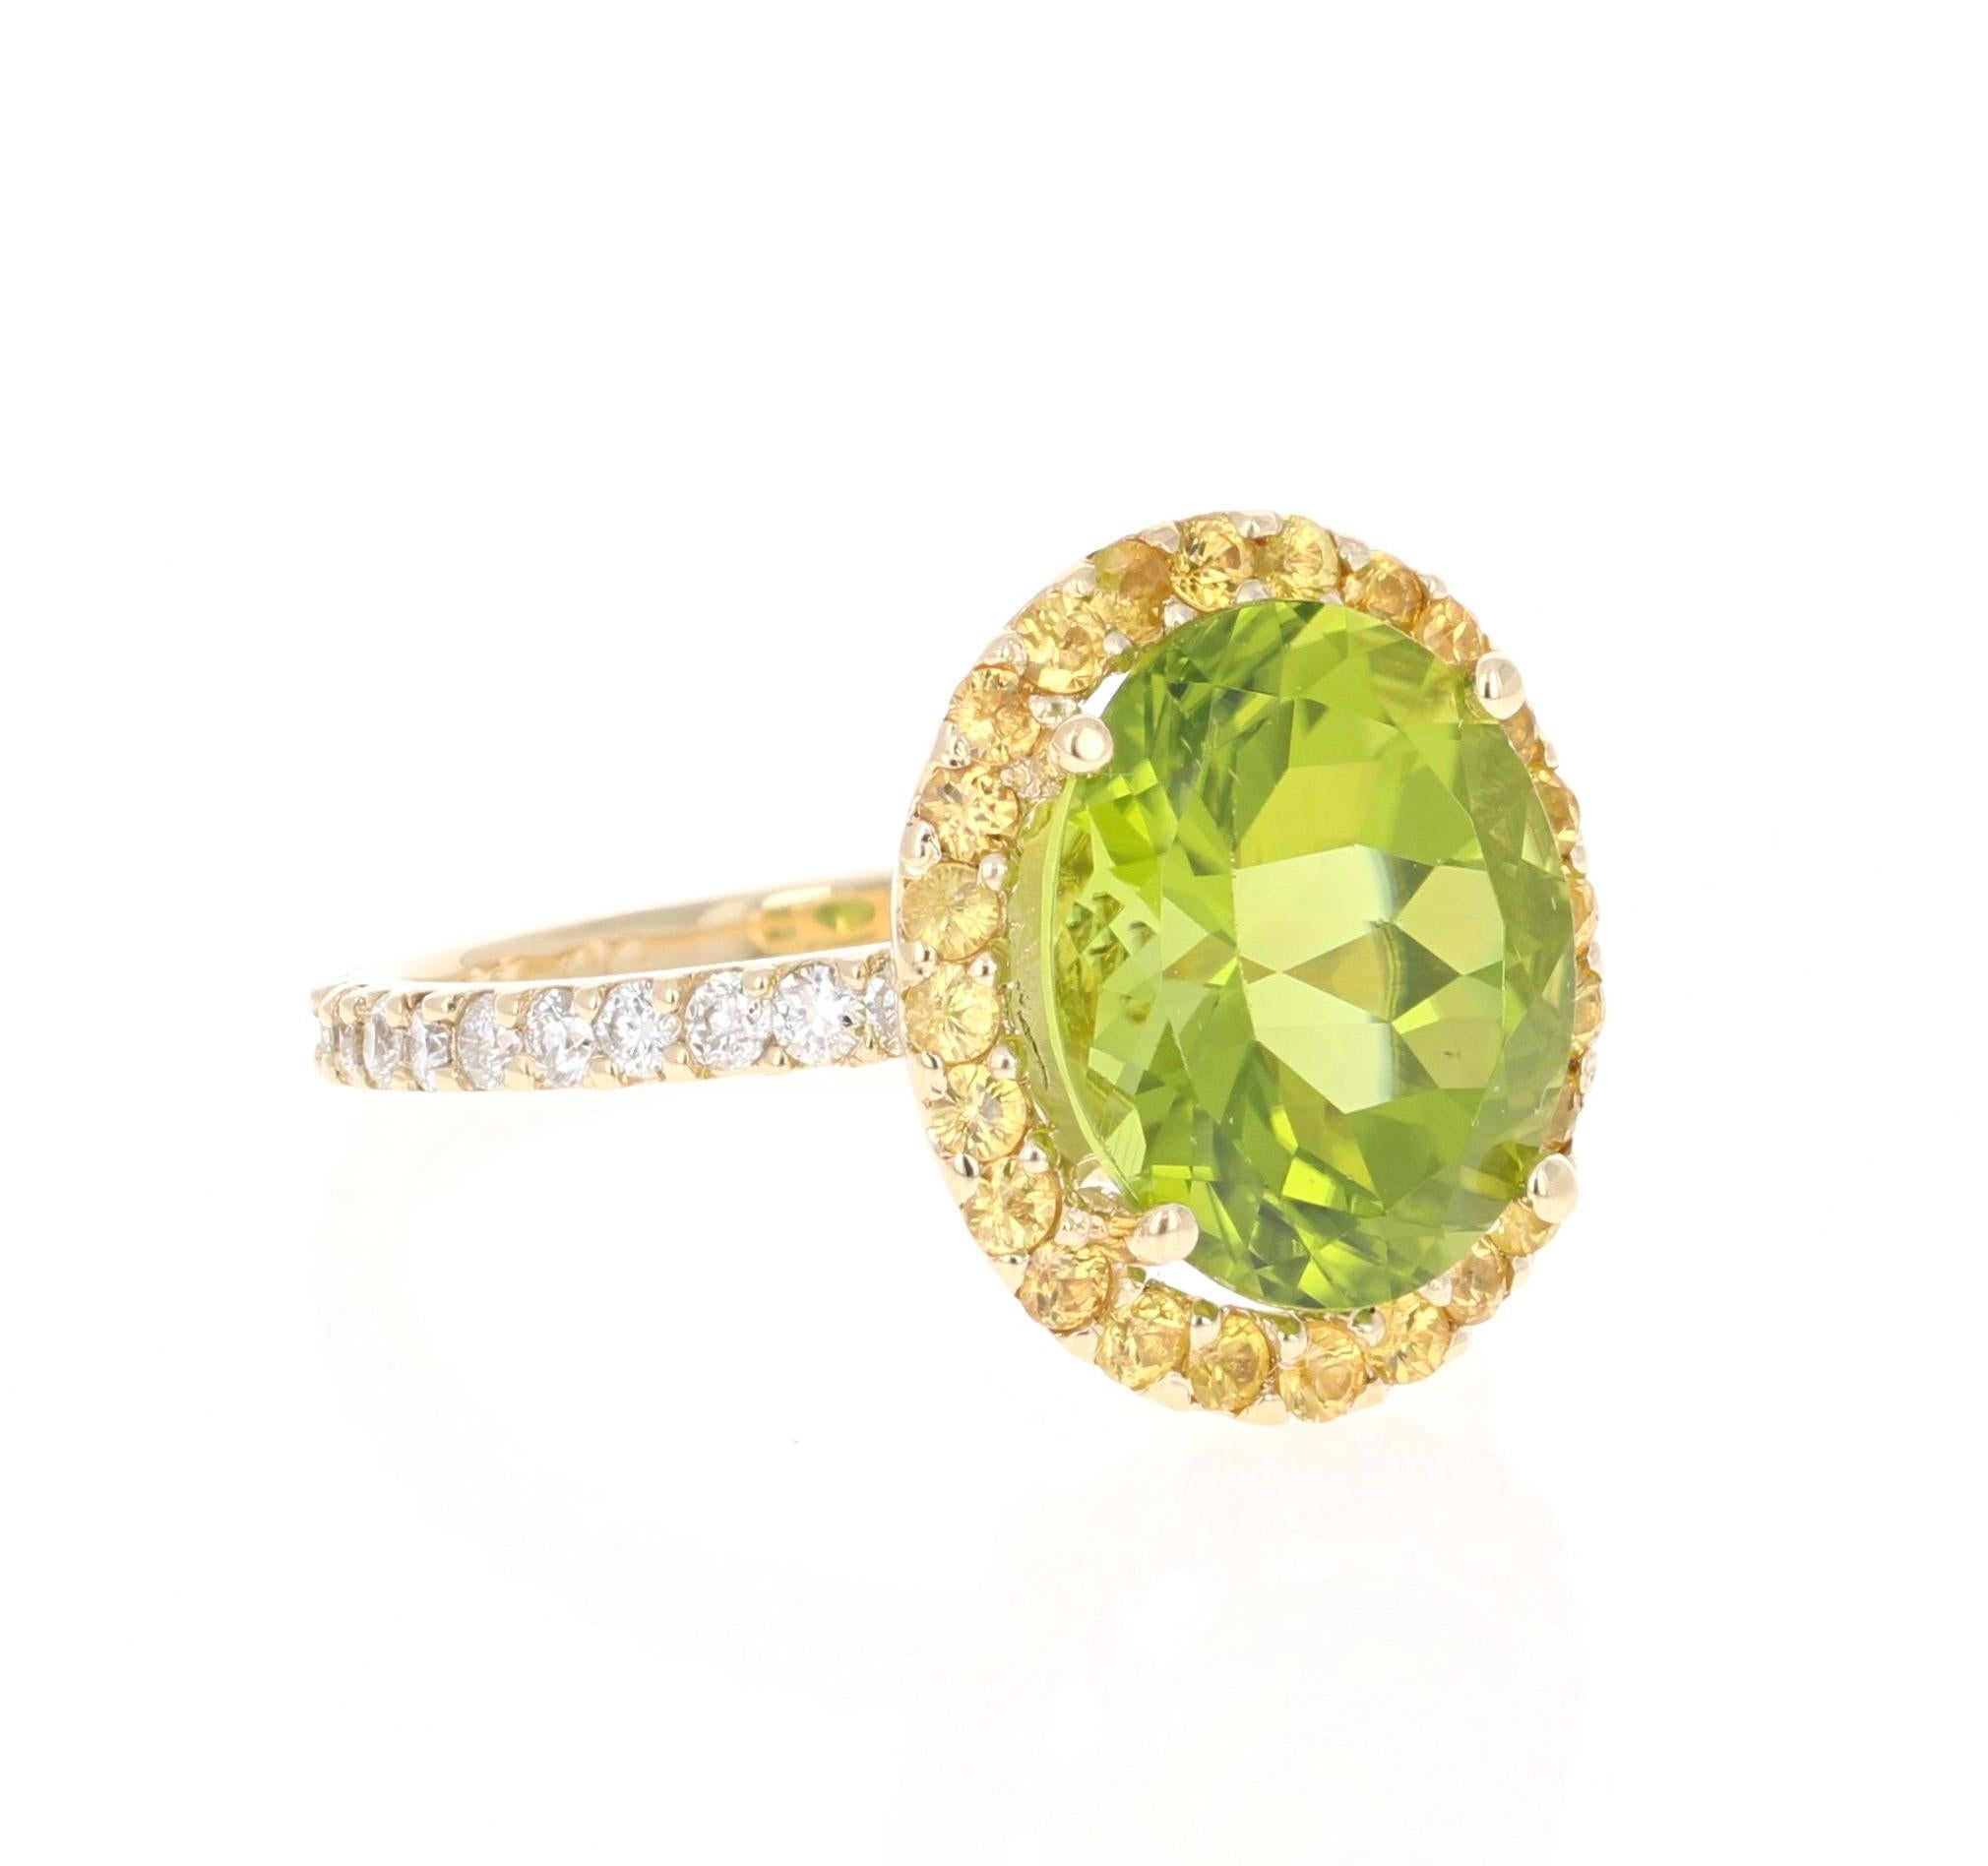 This beauty has a Oval Cut Peridot that weighs 4.93 Carats and is surrounded by a halo of 24 Yellow Sapphires that weigh 0.56 Carats. Furthermore the shank of the ring has 24 Round Cut Diamonds that weigh 0.46 Carats. The total carat weight of this